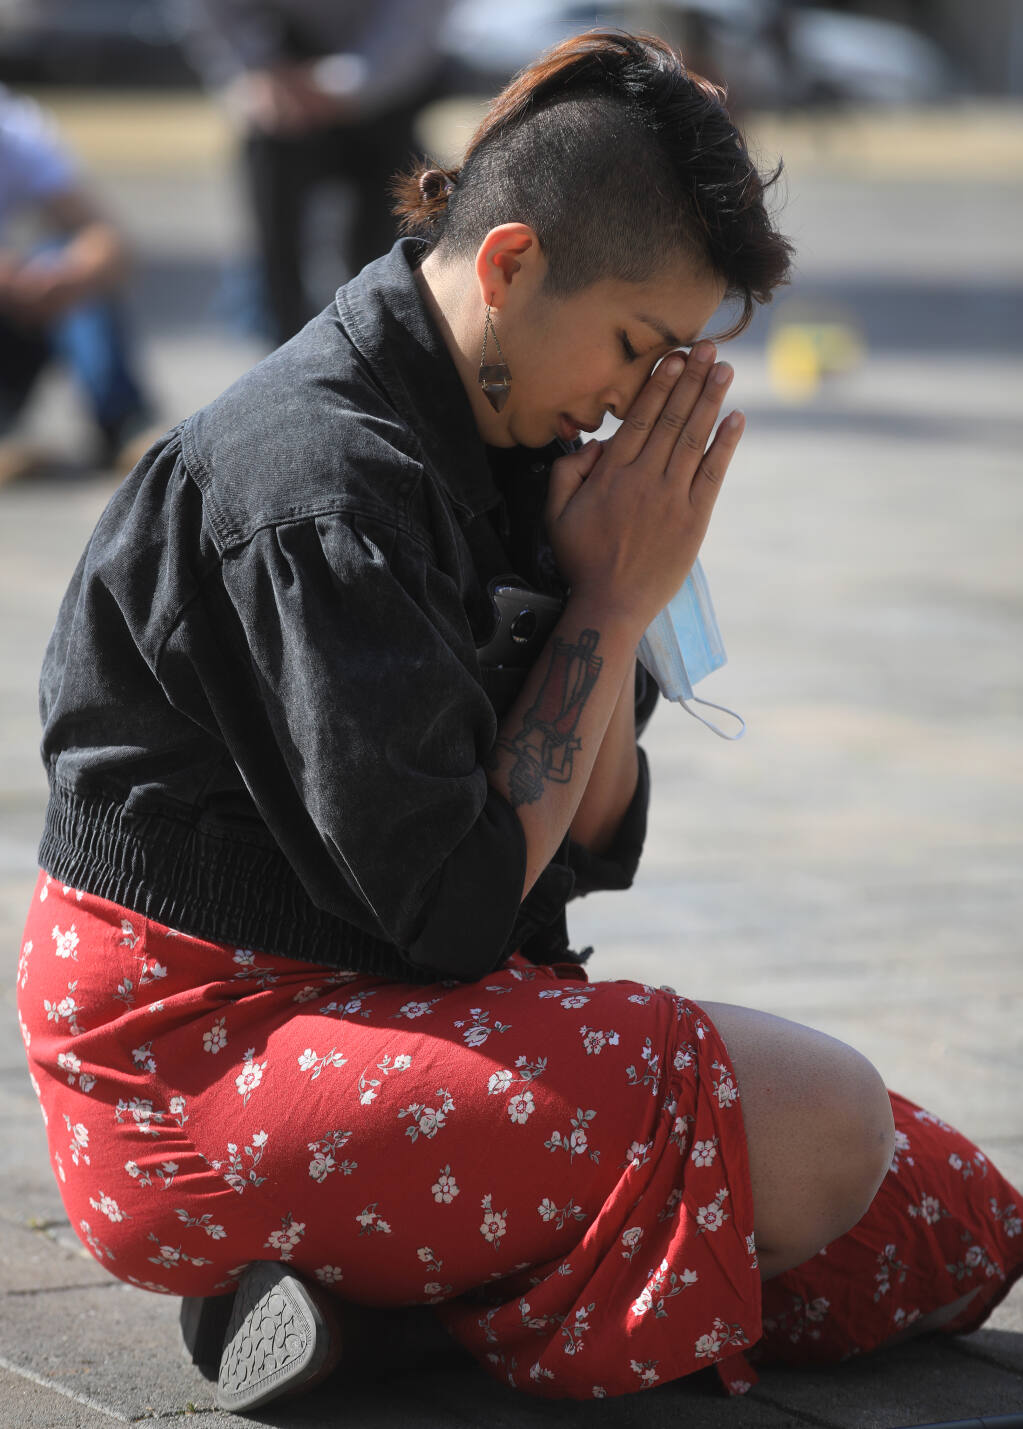 Chantavy Tornado, who is Khmer and a co-organizer of "Game Over," says a prayer during an event denouncing violence against Asian Americans at Old Courthouse Square in Santa Rosa, Saturday Feb. 20, 2021.  (Kent Porter / The Press Democrat) 2021